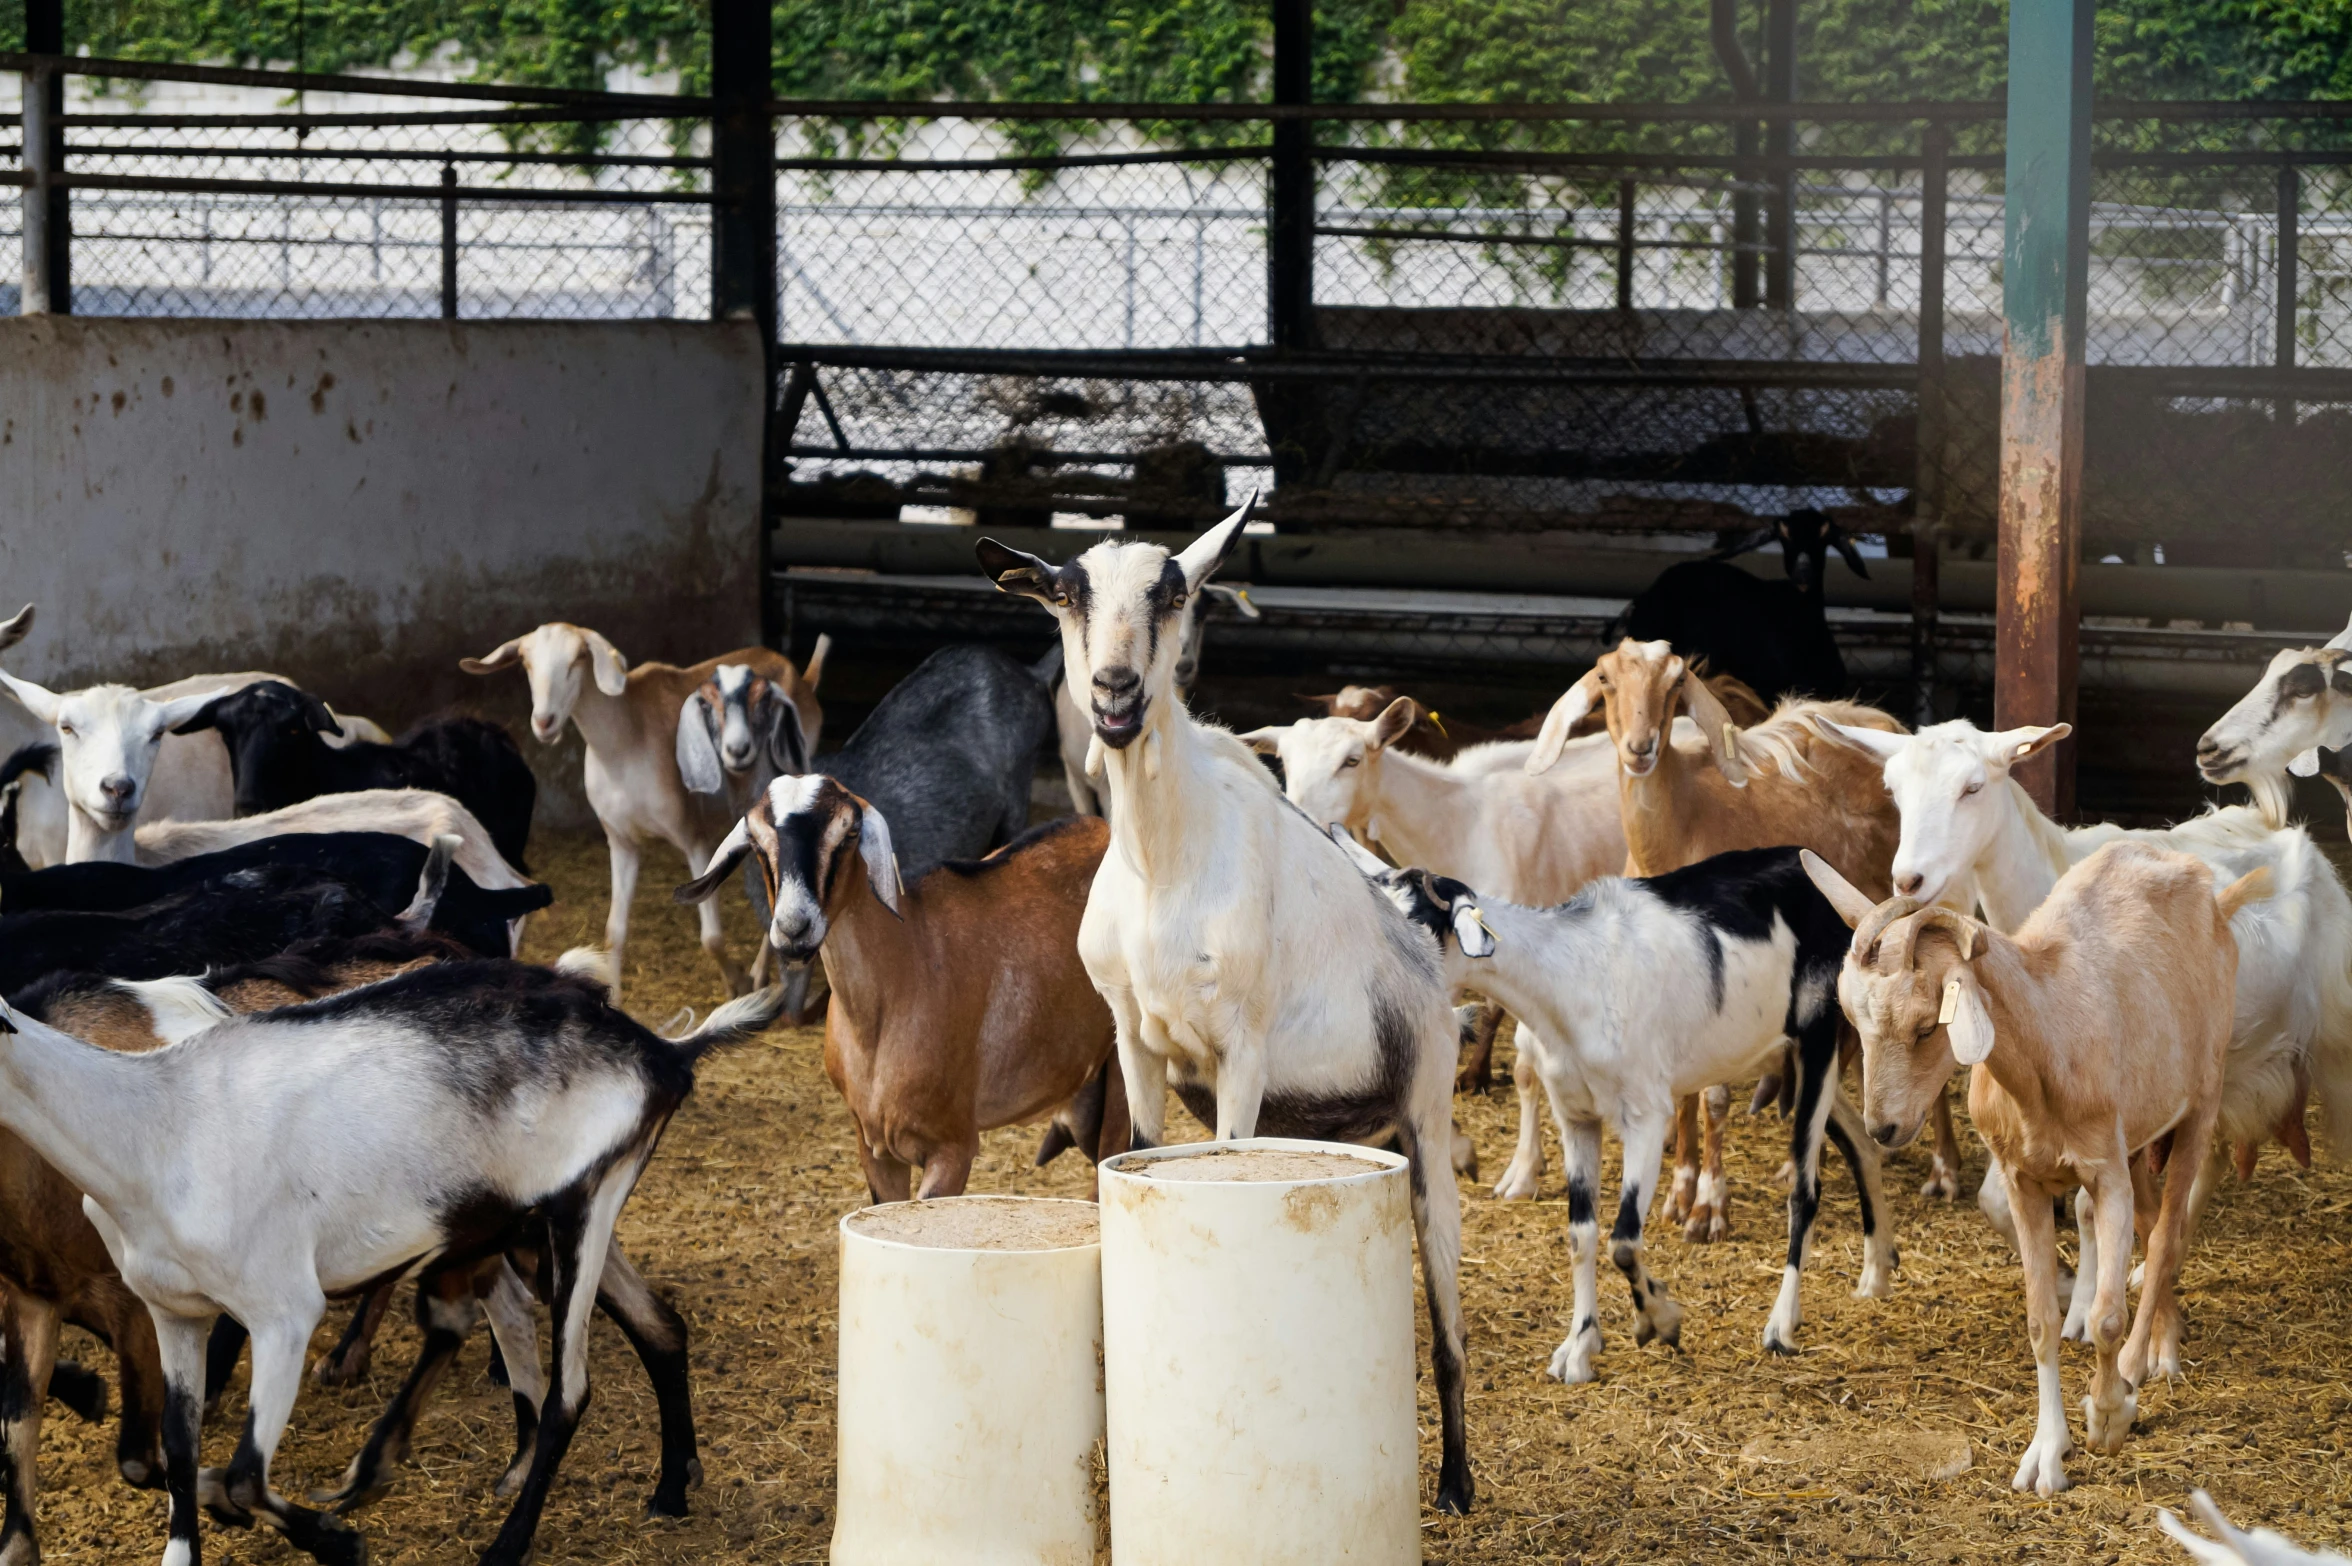 goats and other animals in an enclosure on hay